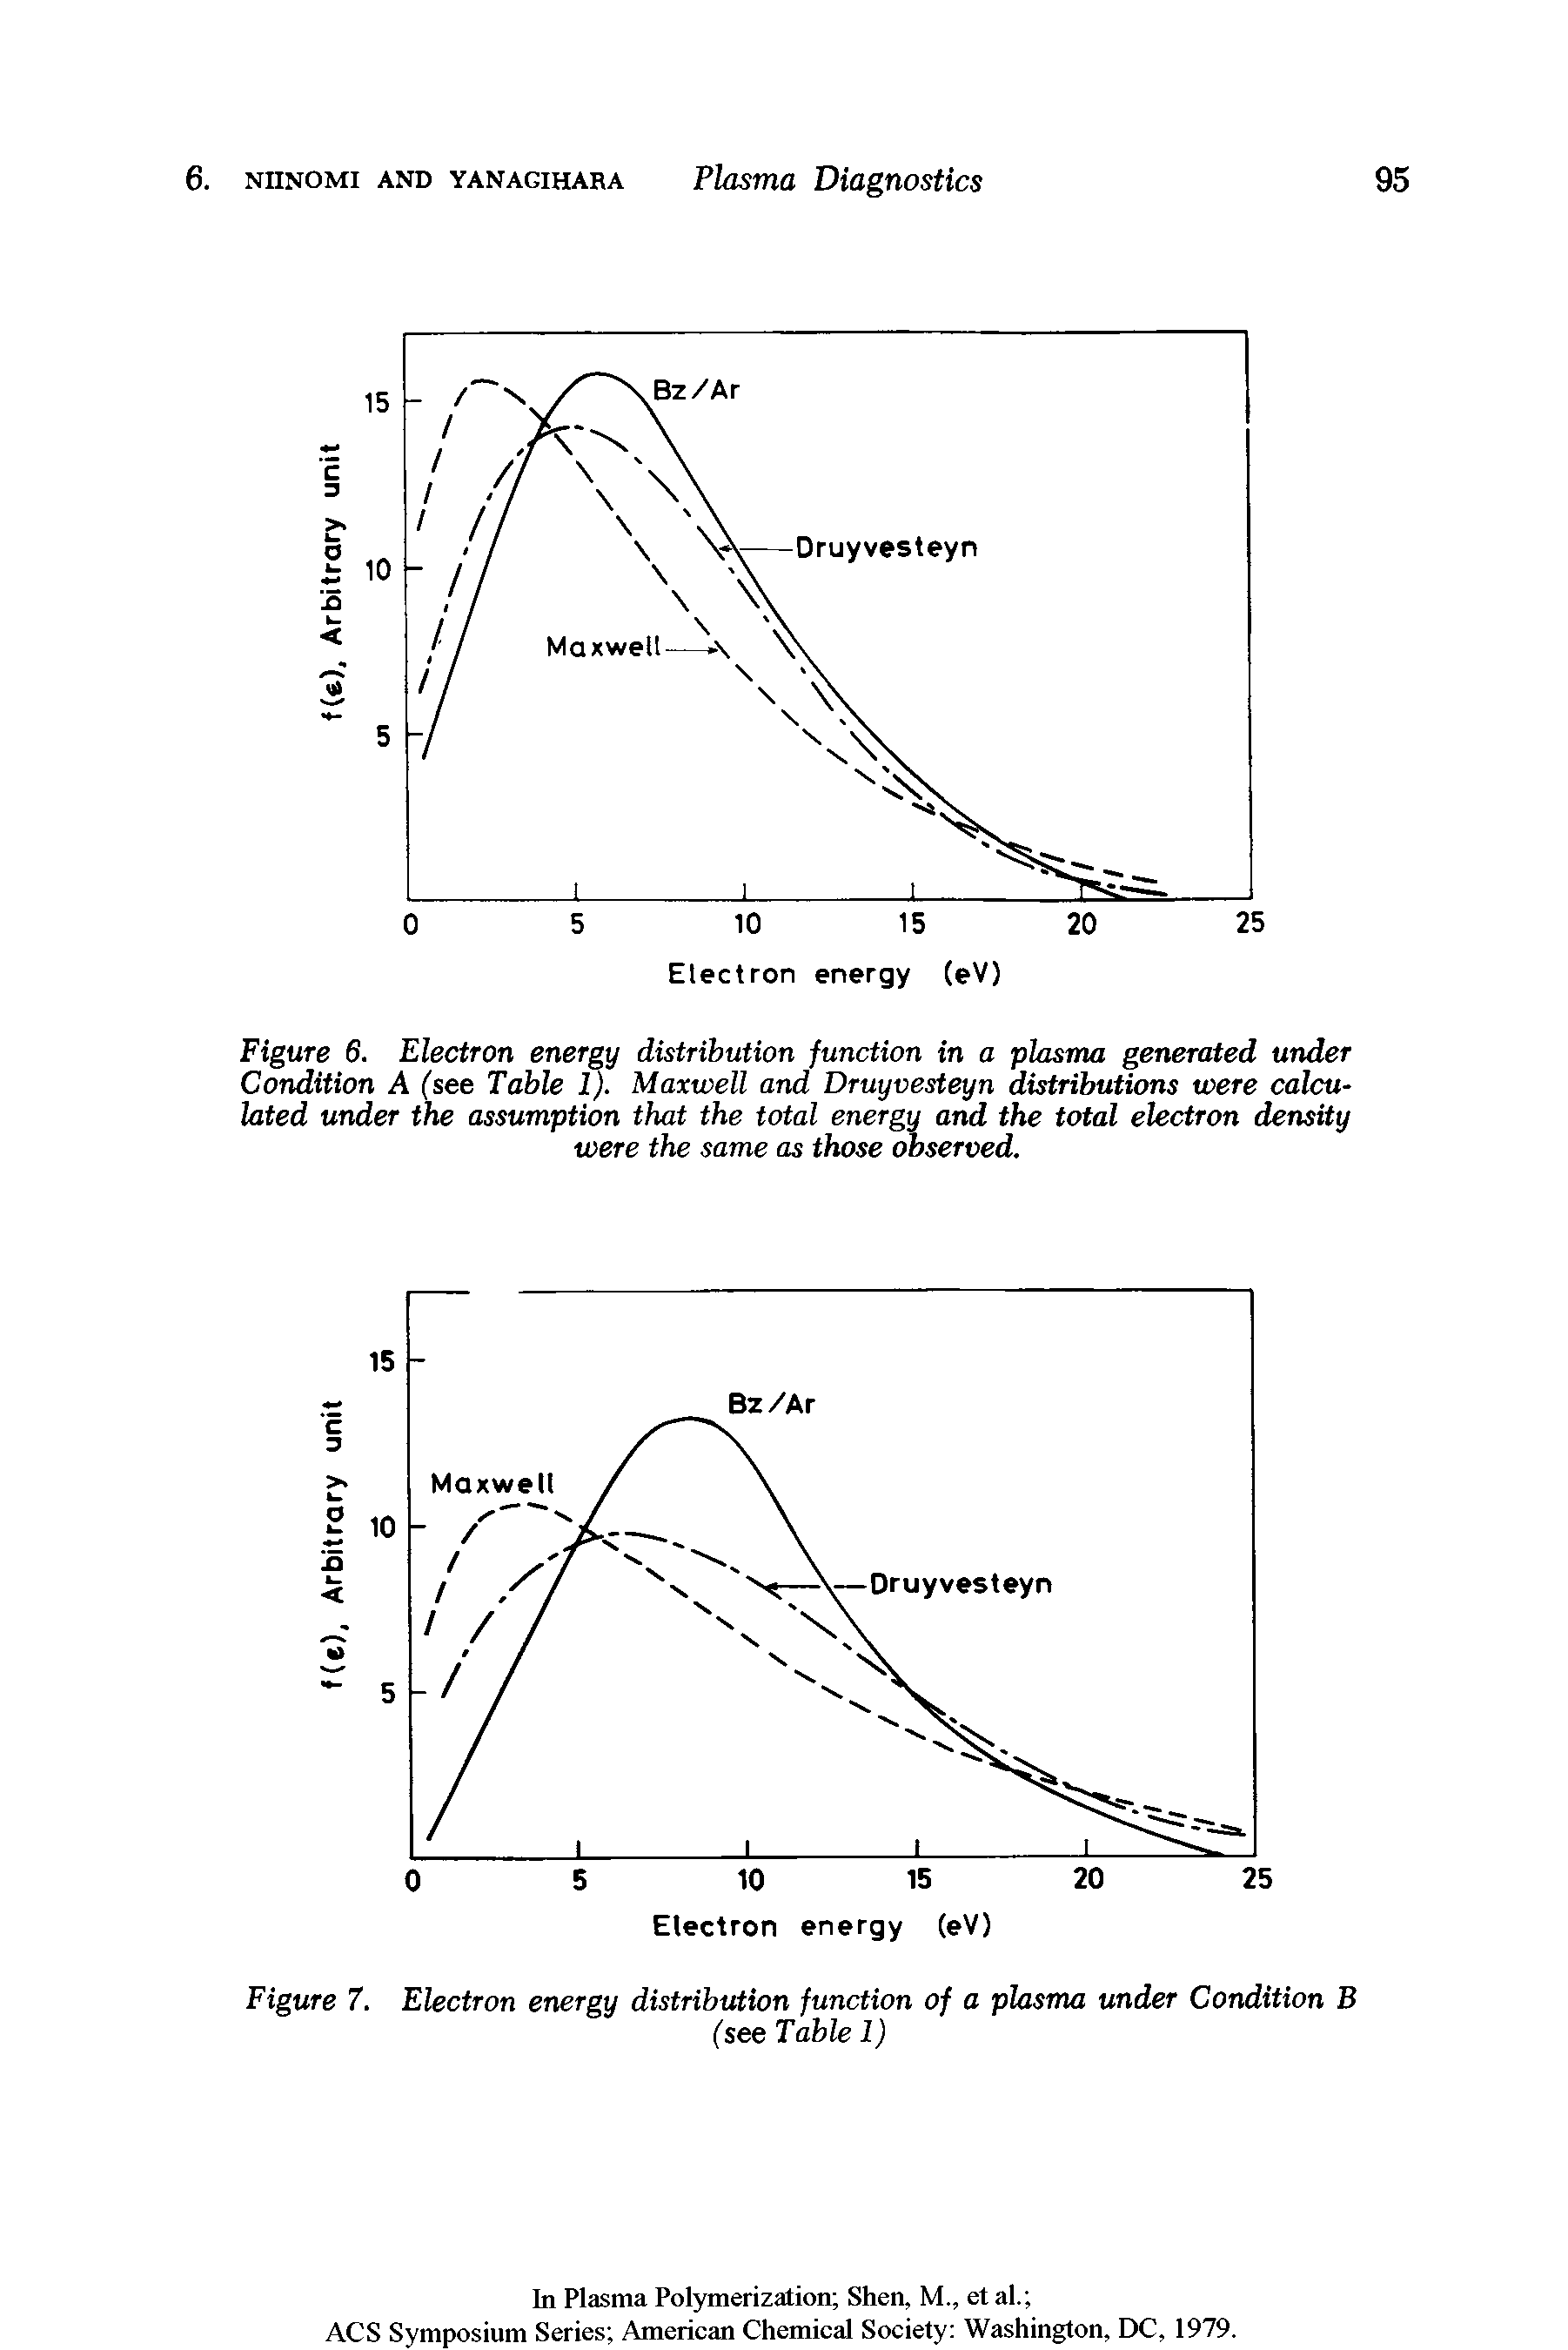 Figure 6. Electron energy distribution function in a plasma generated under Condition A (see Table 1). Maxwell and Druyvesteyn distributions were calculated under the assumption that the total energy and the total electron density were the same as those observed.